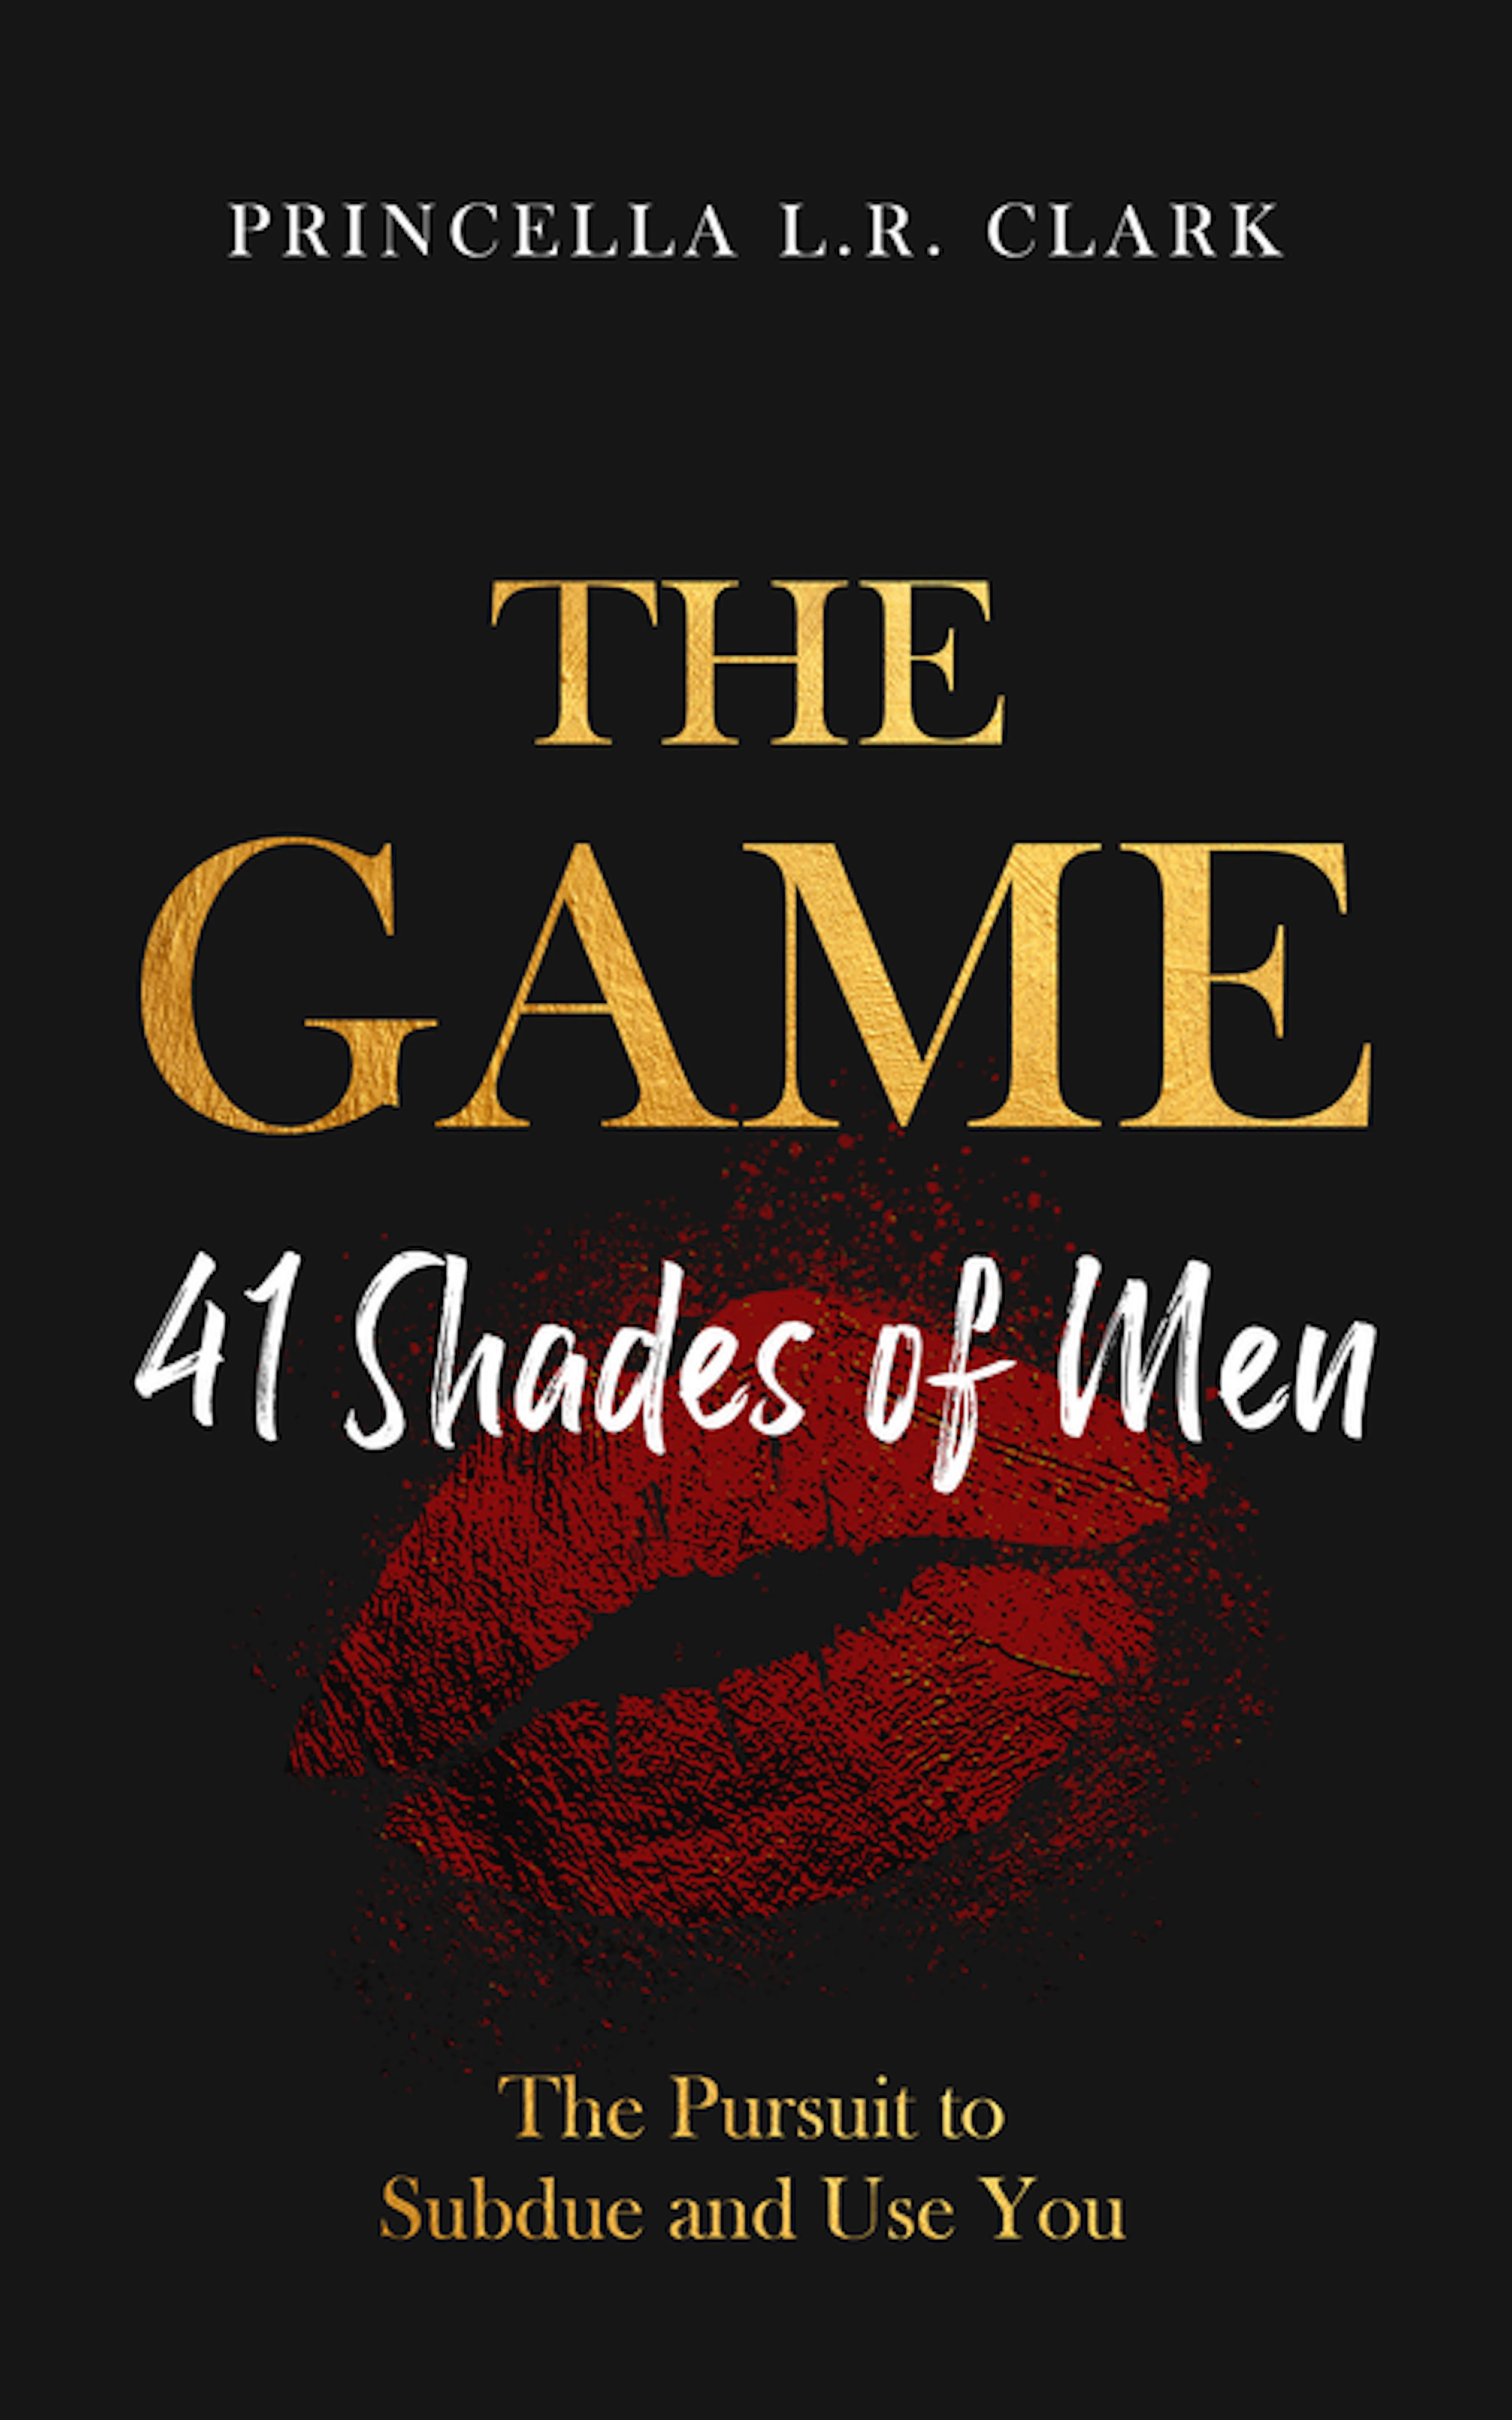 The Game: 41 Shades of Men